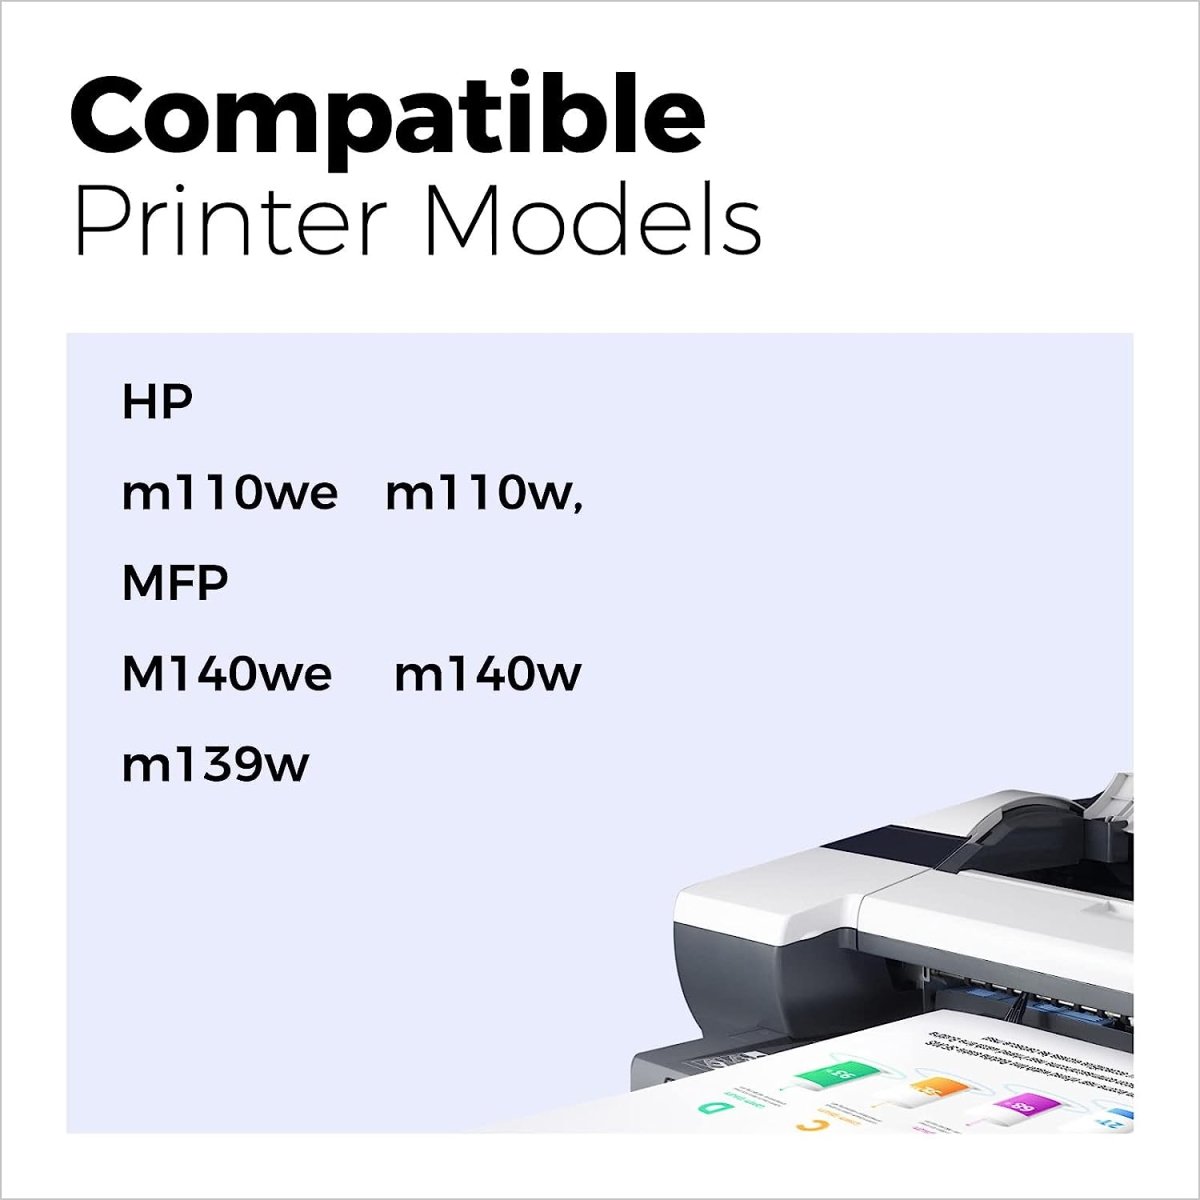 HP 141A Toner Cartridge myCartridge Compatible with Chip (1 Black) - Linford Office:Printer Ink & Toner Cartridge